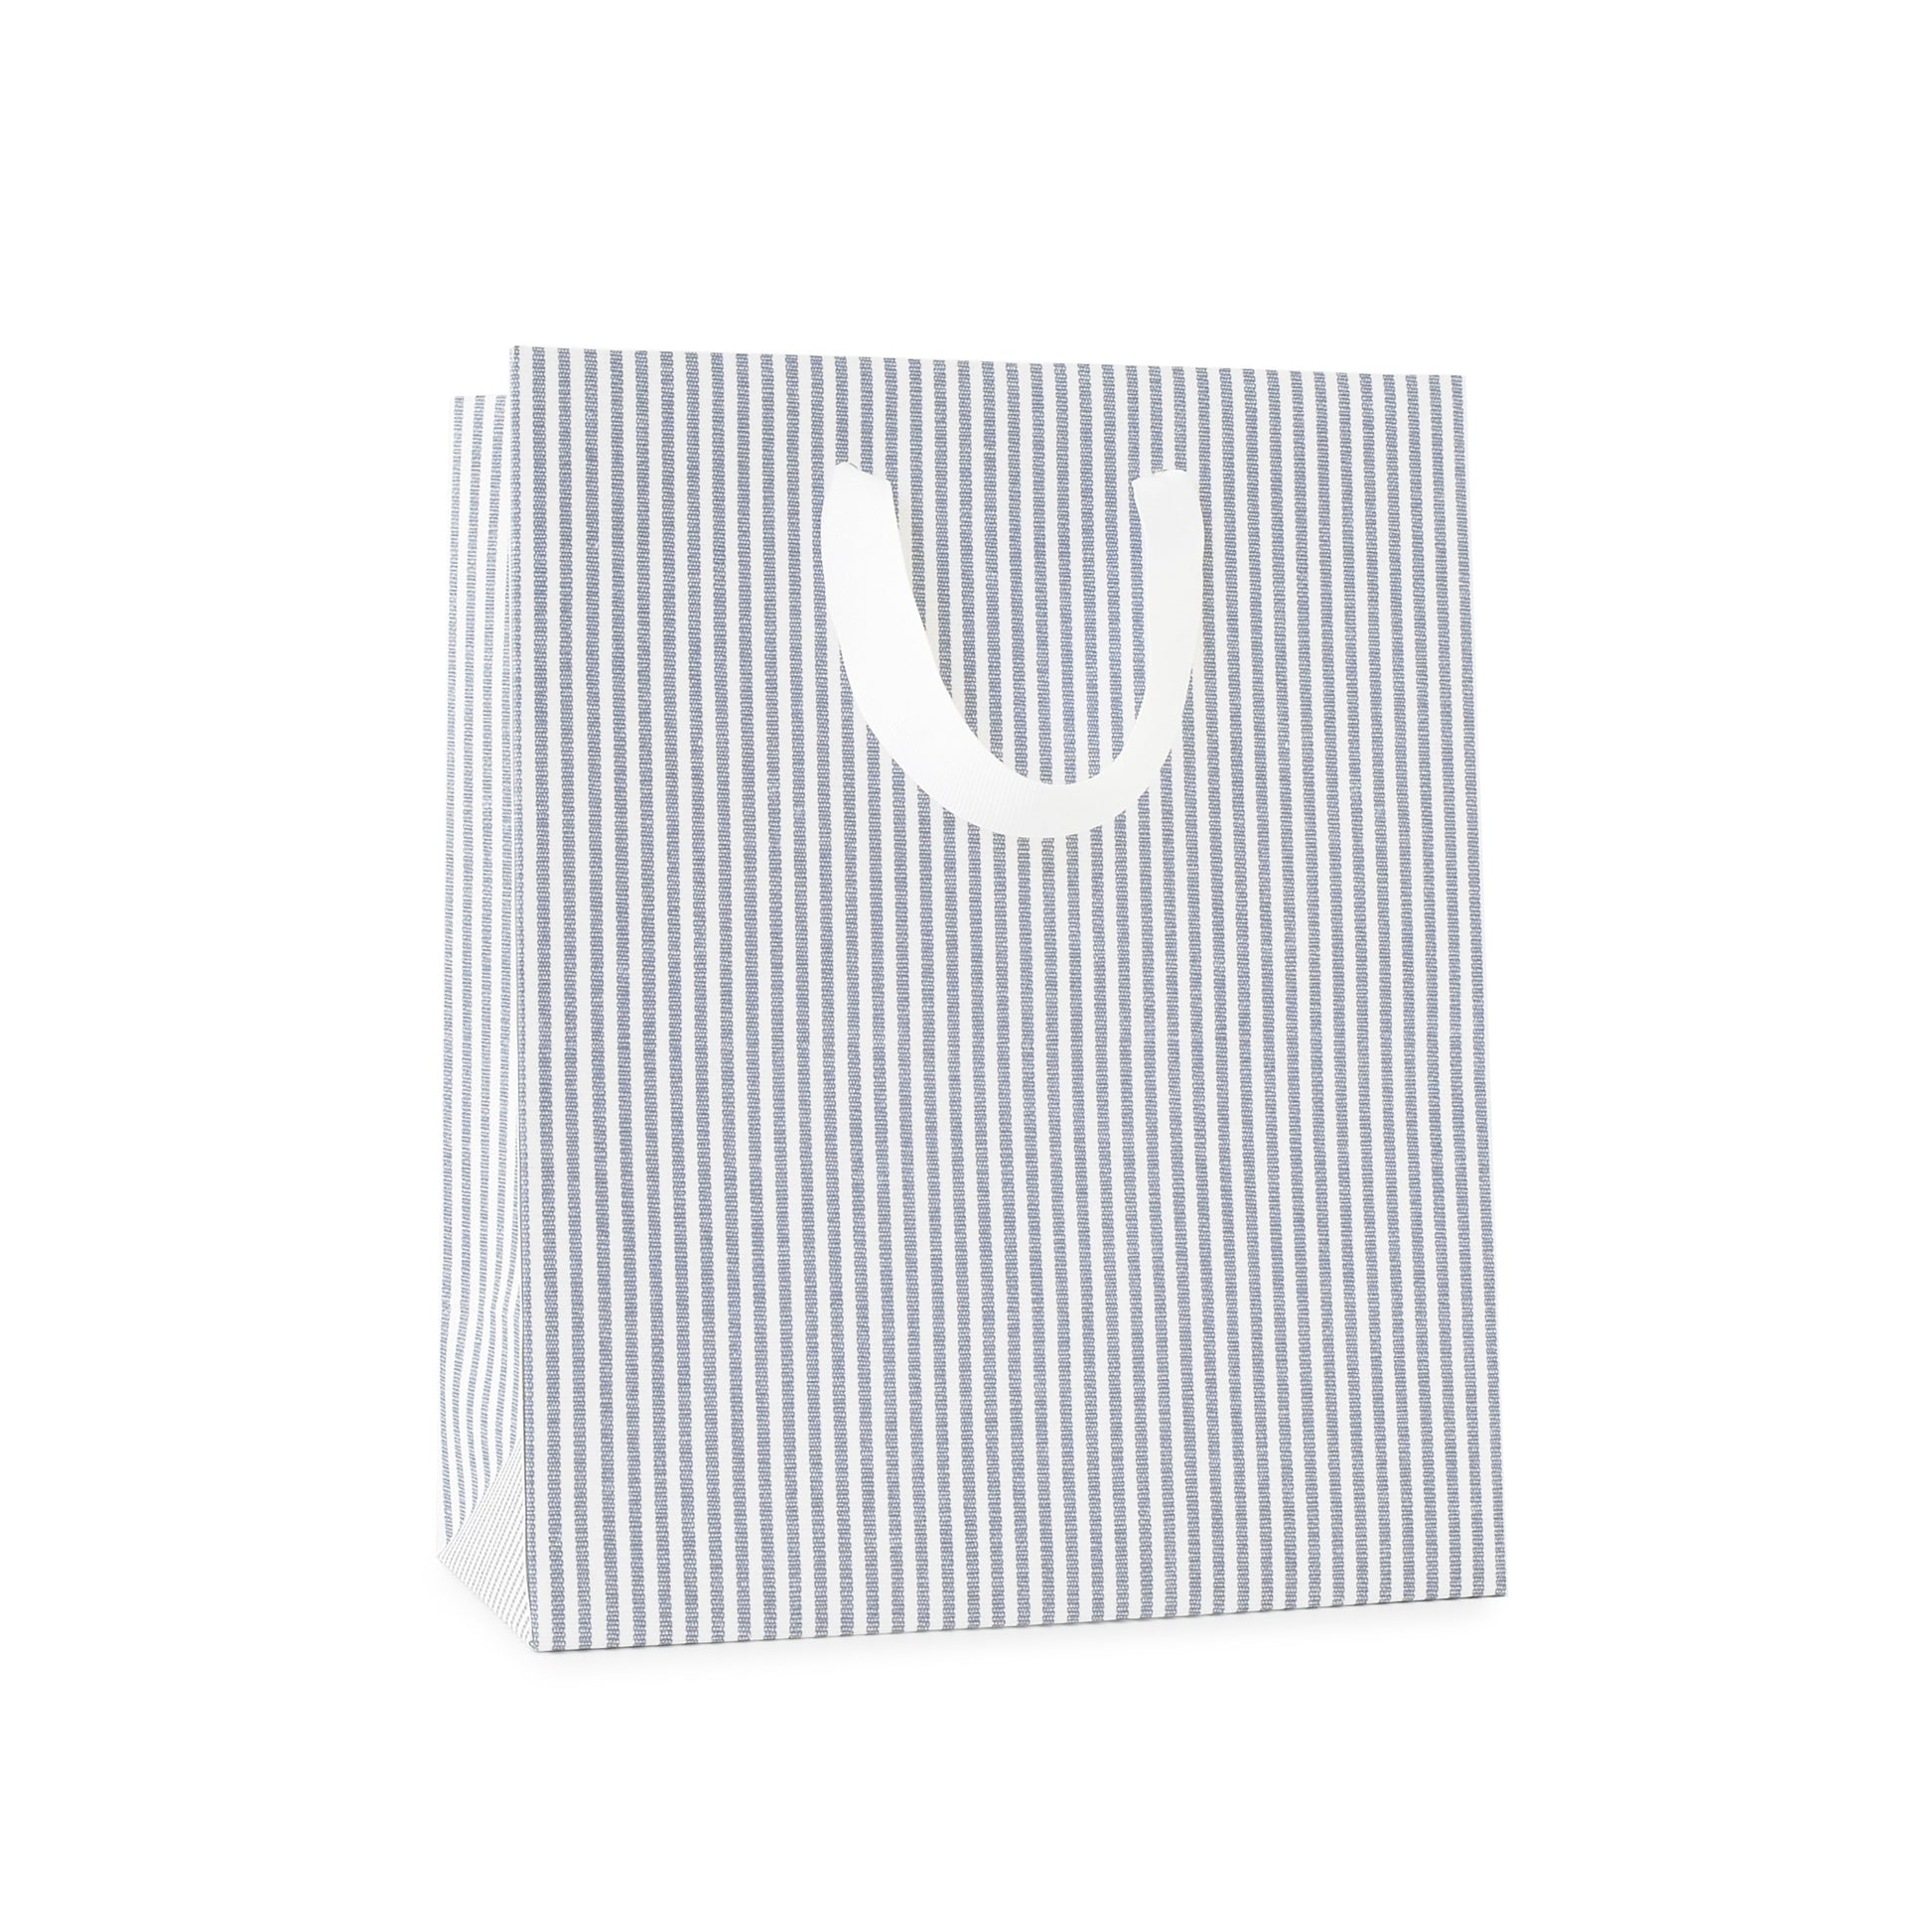 White Paper Bags - Bags with handle for shopping, stores & shops